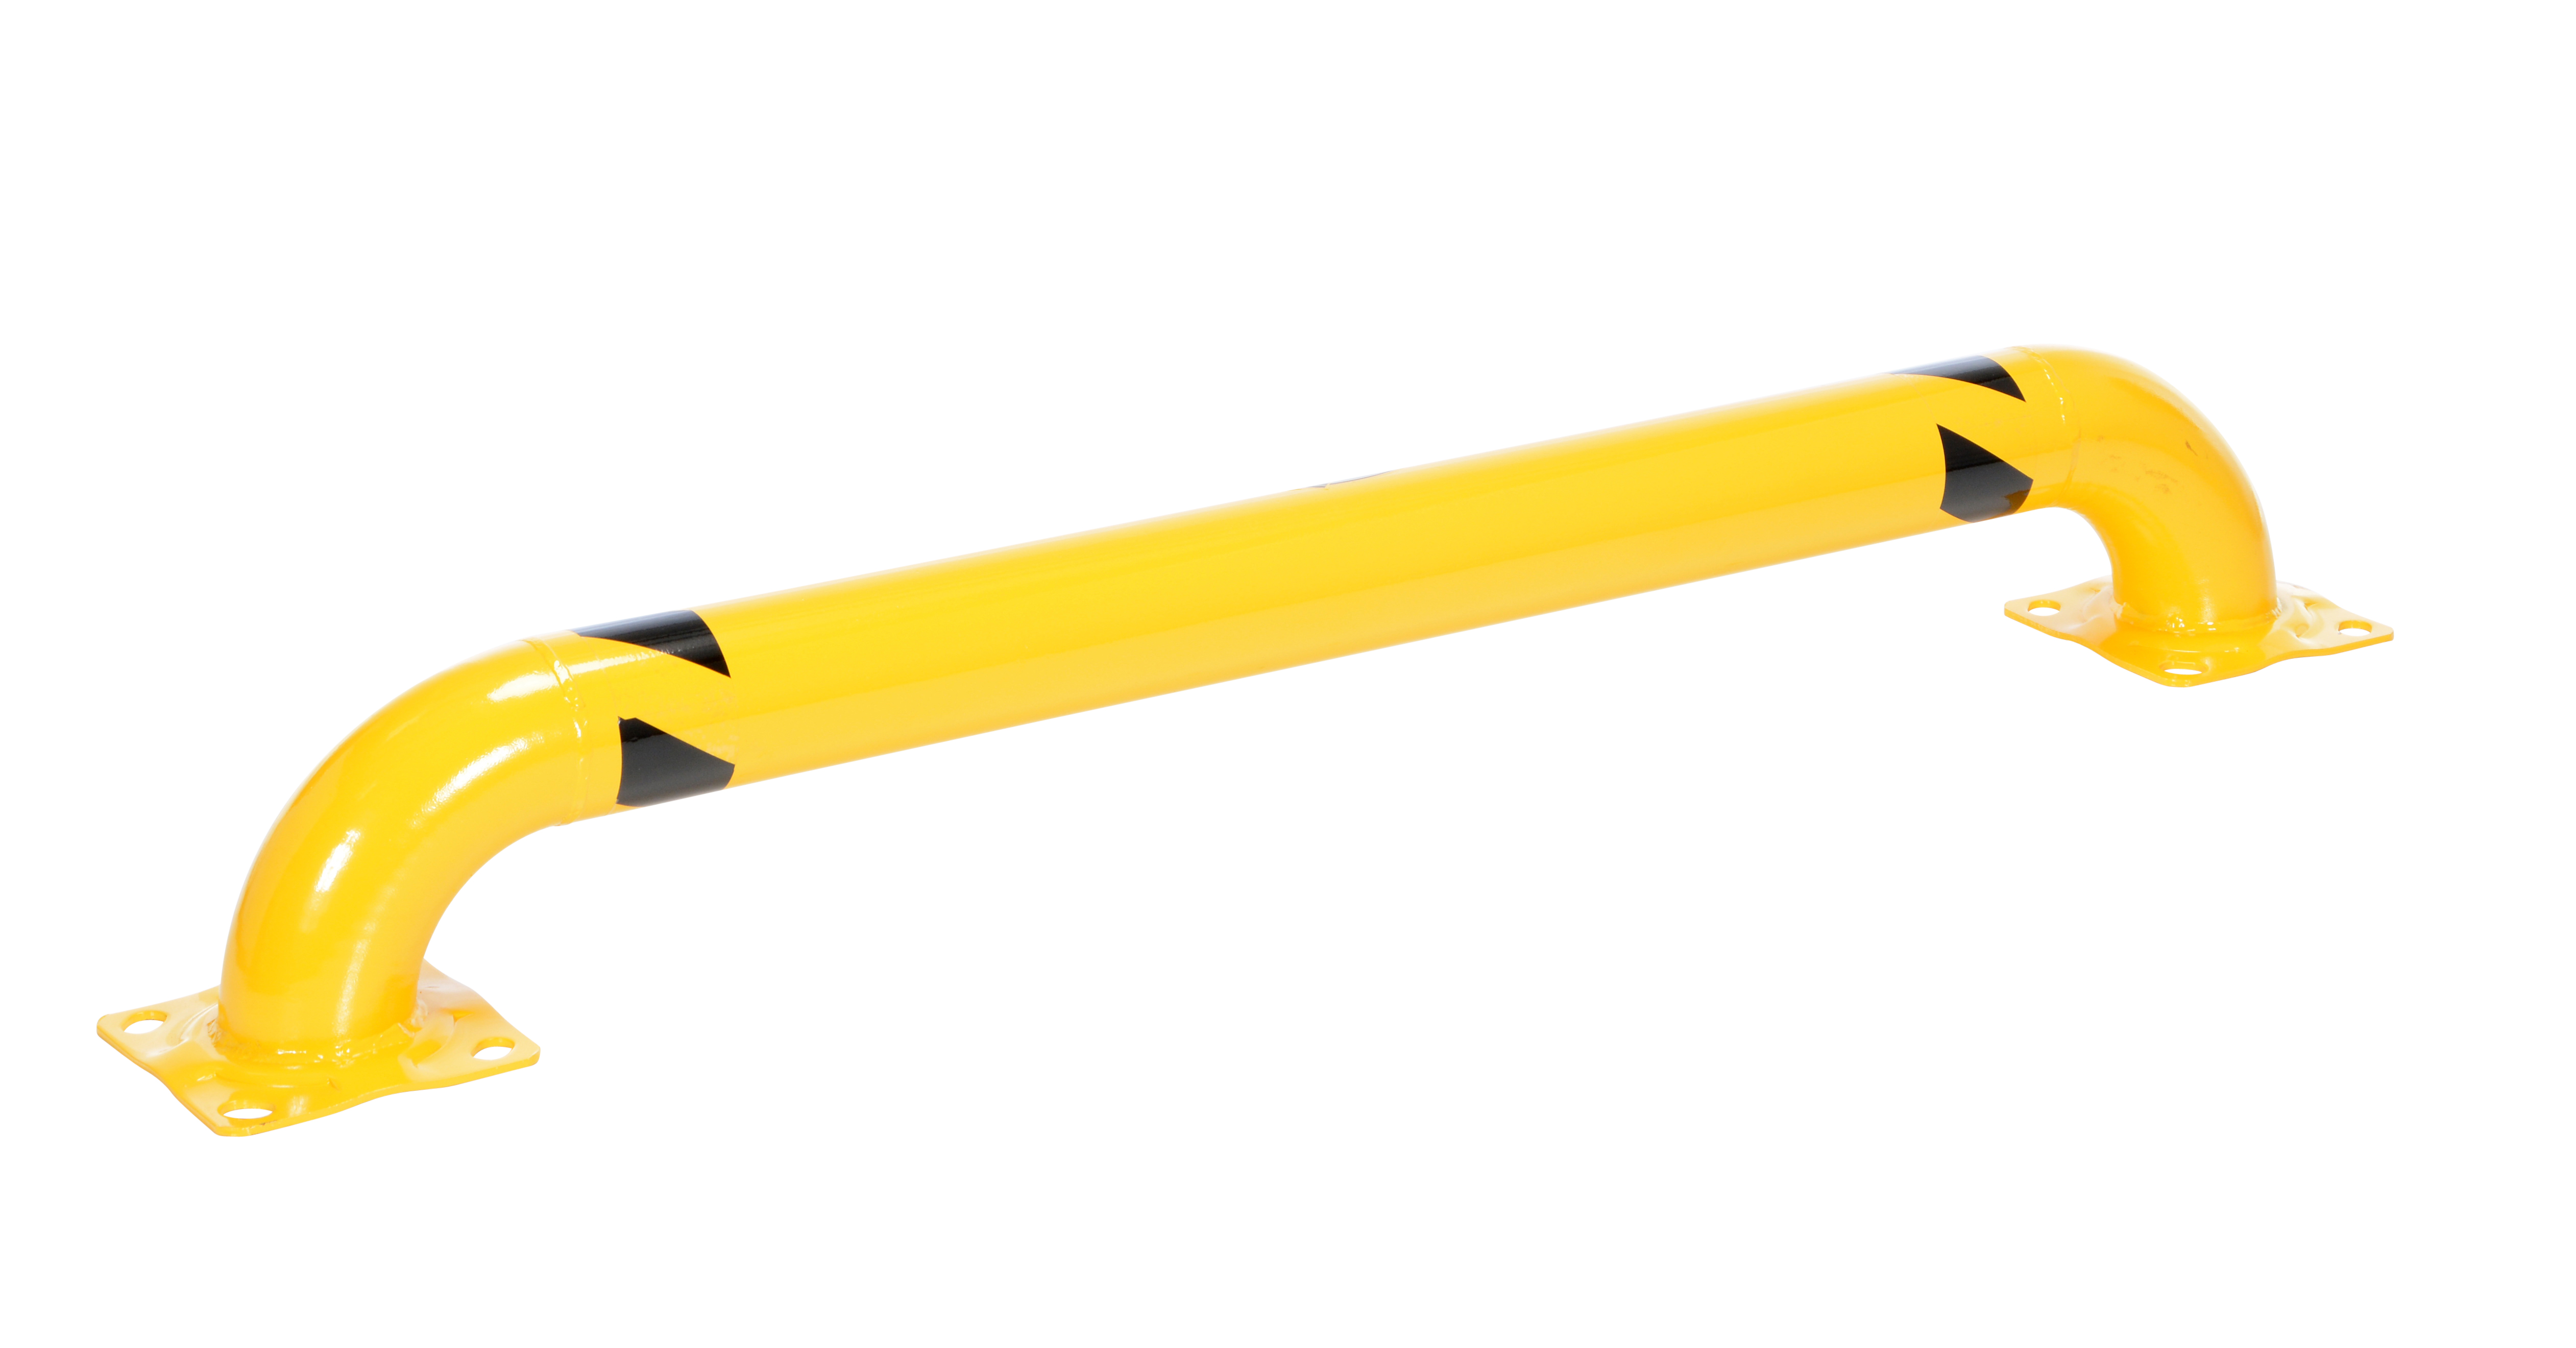 Steel with Powder Coat Finish 147.5 Width x 8-15/16 Height x 8 Length Yellow Vestil LPRO-144-9-4 Low Profile Rack Guard 